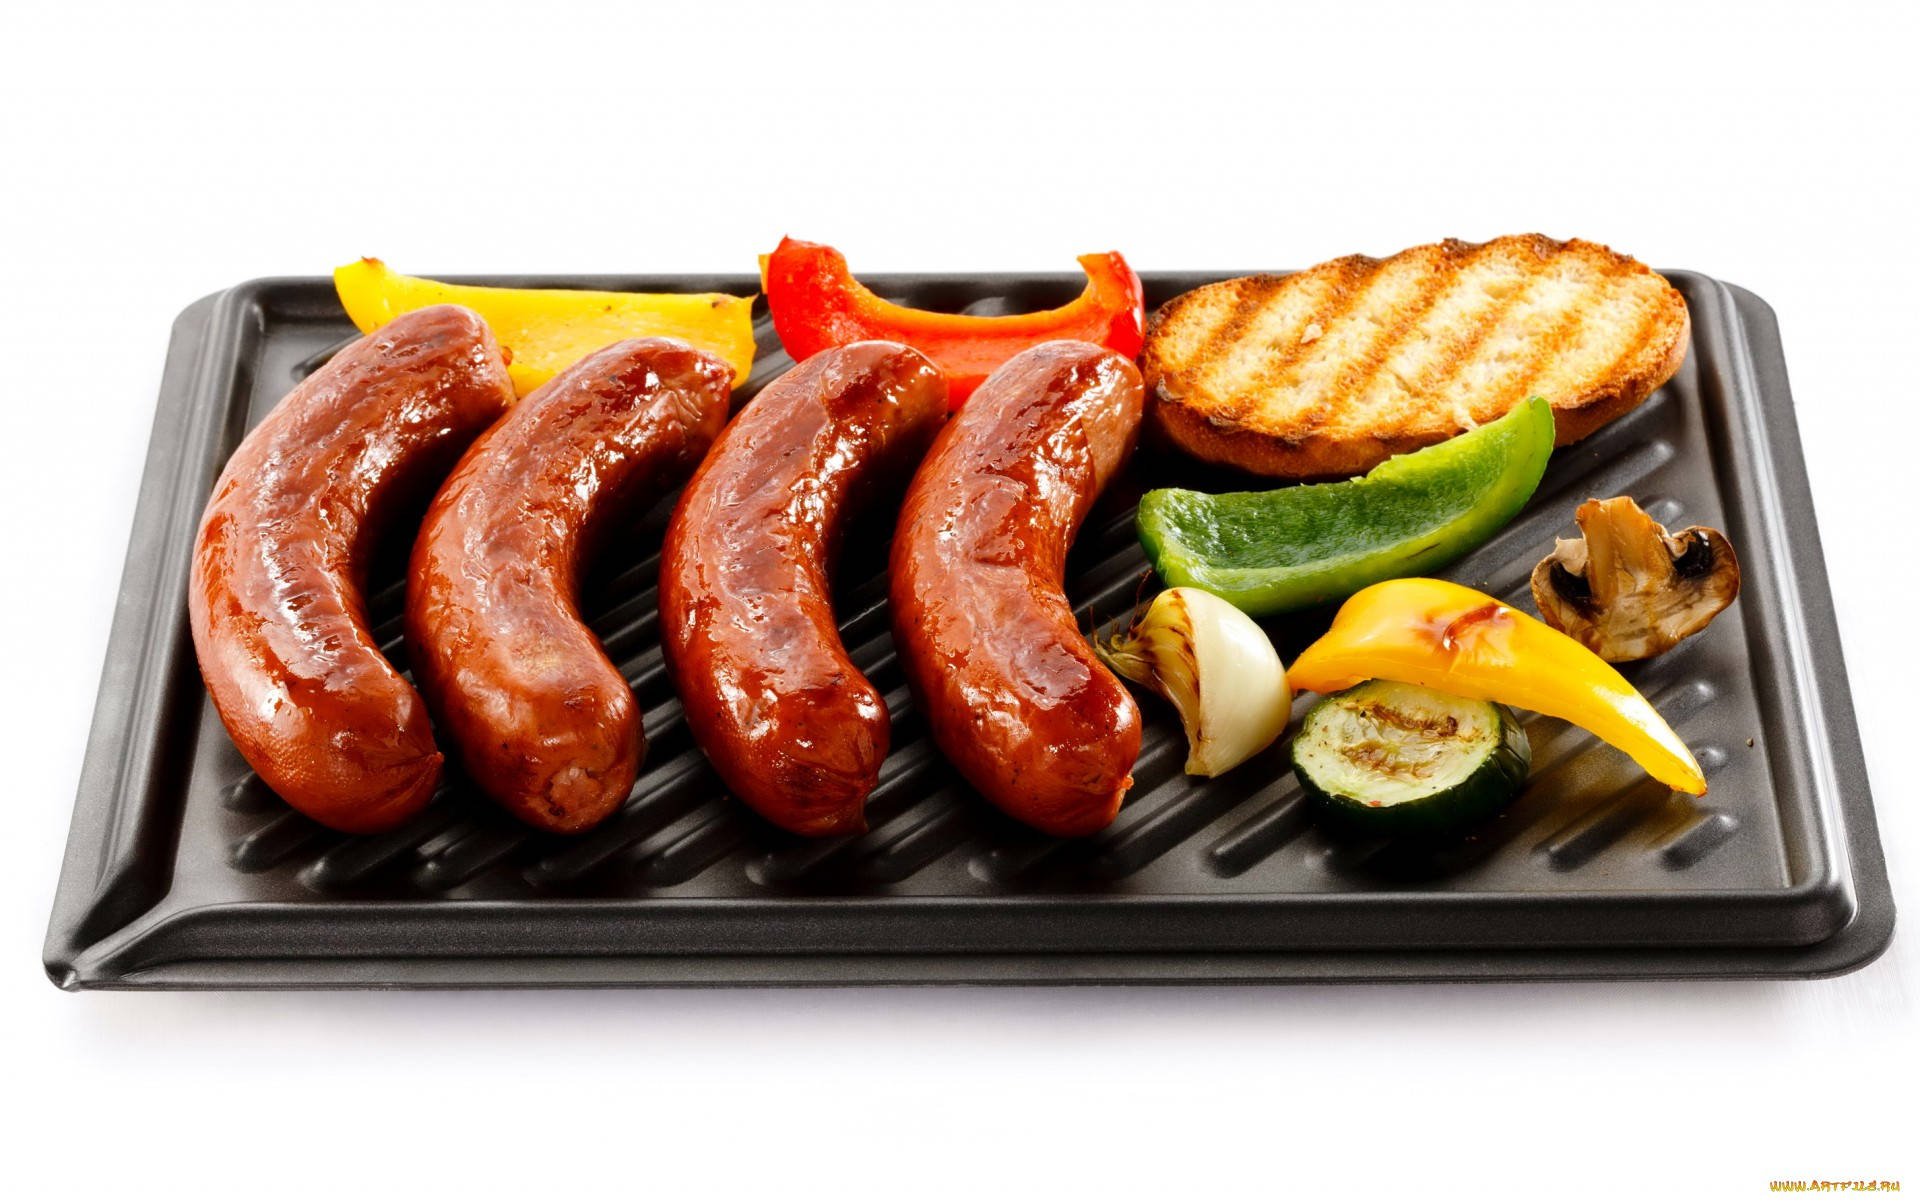 Four Sausage Meat On Griller Wallpaper